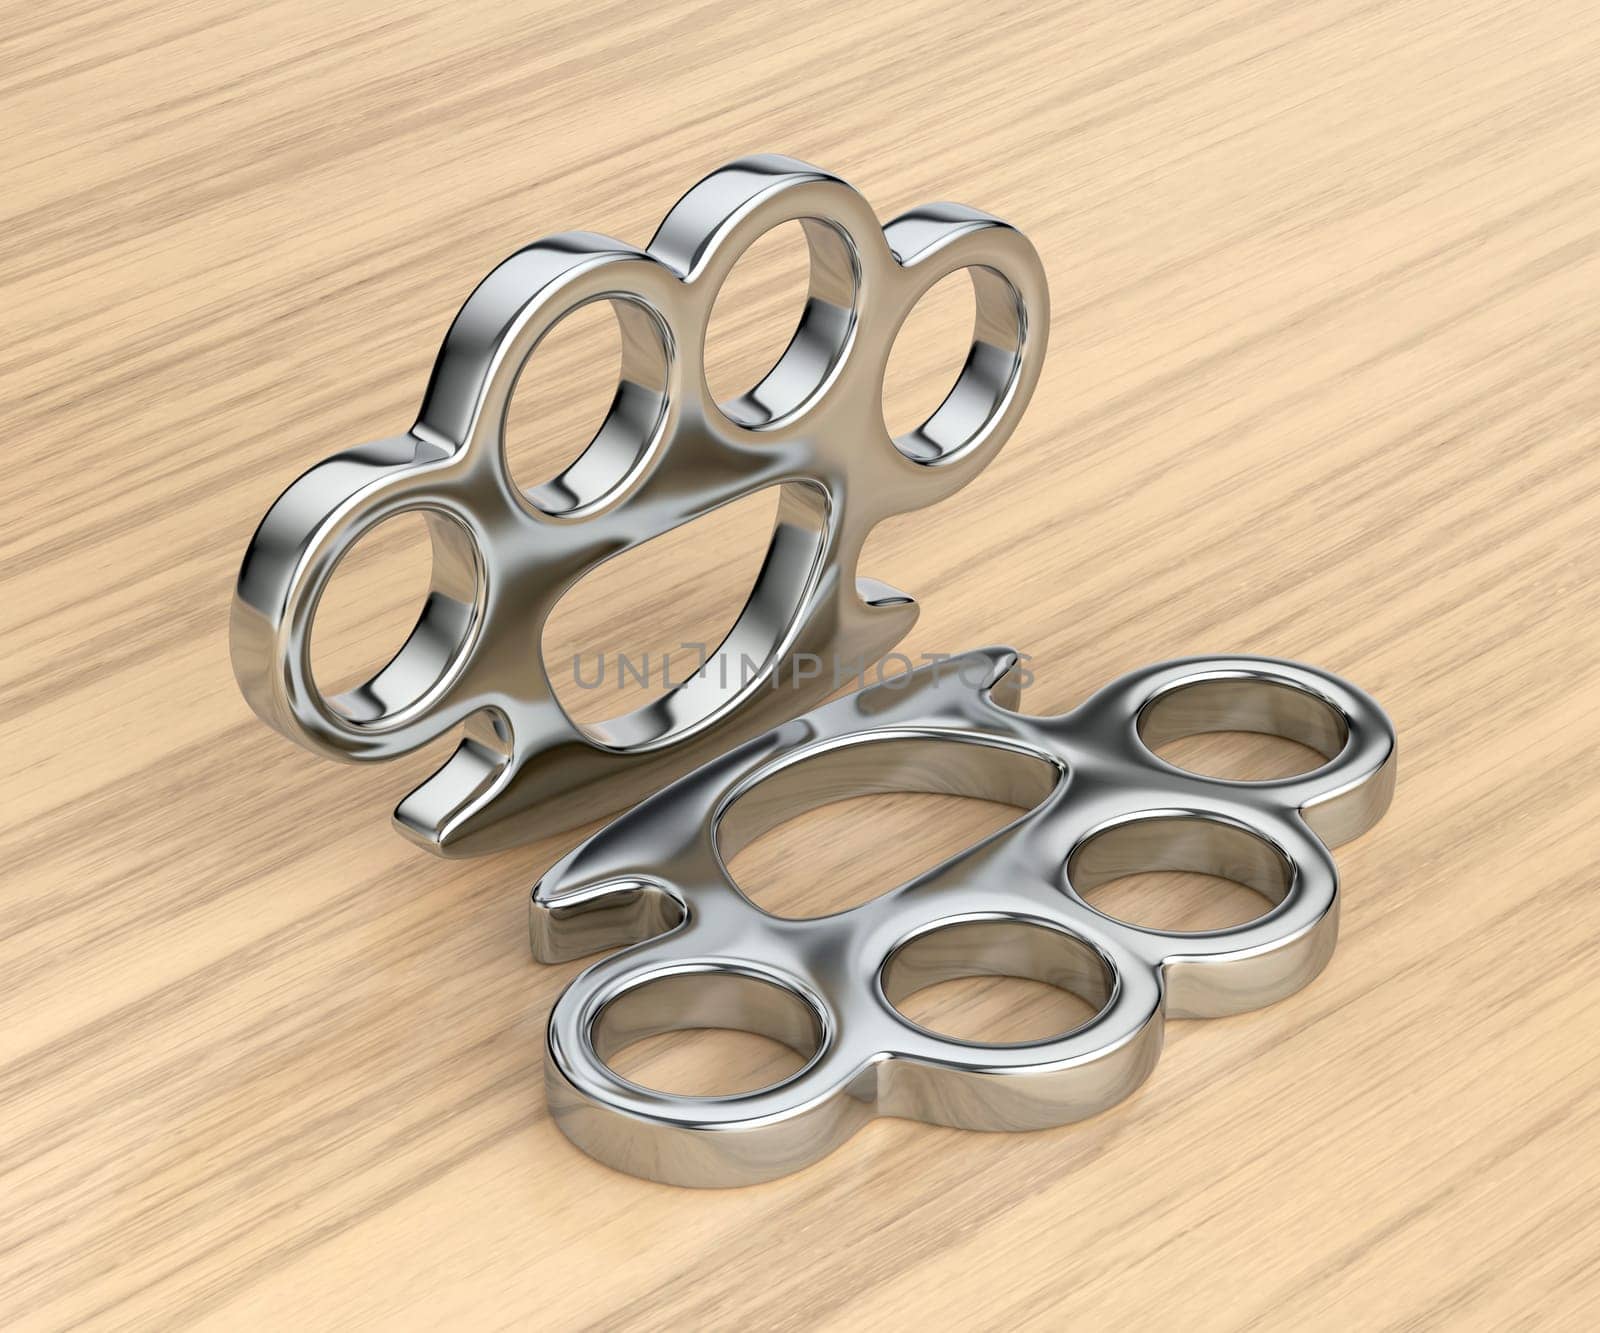 Pair of brass knuckles by magraphics